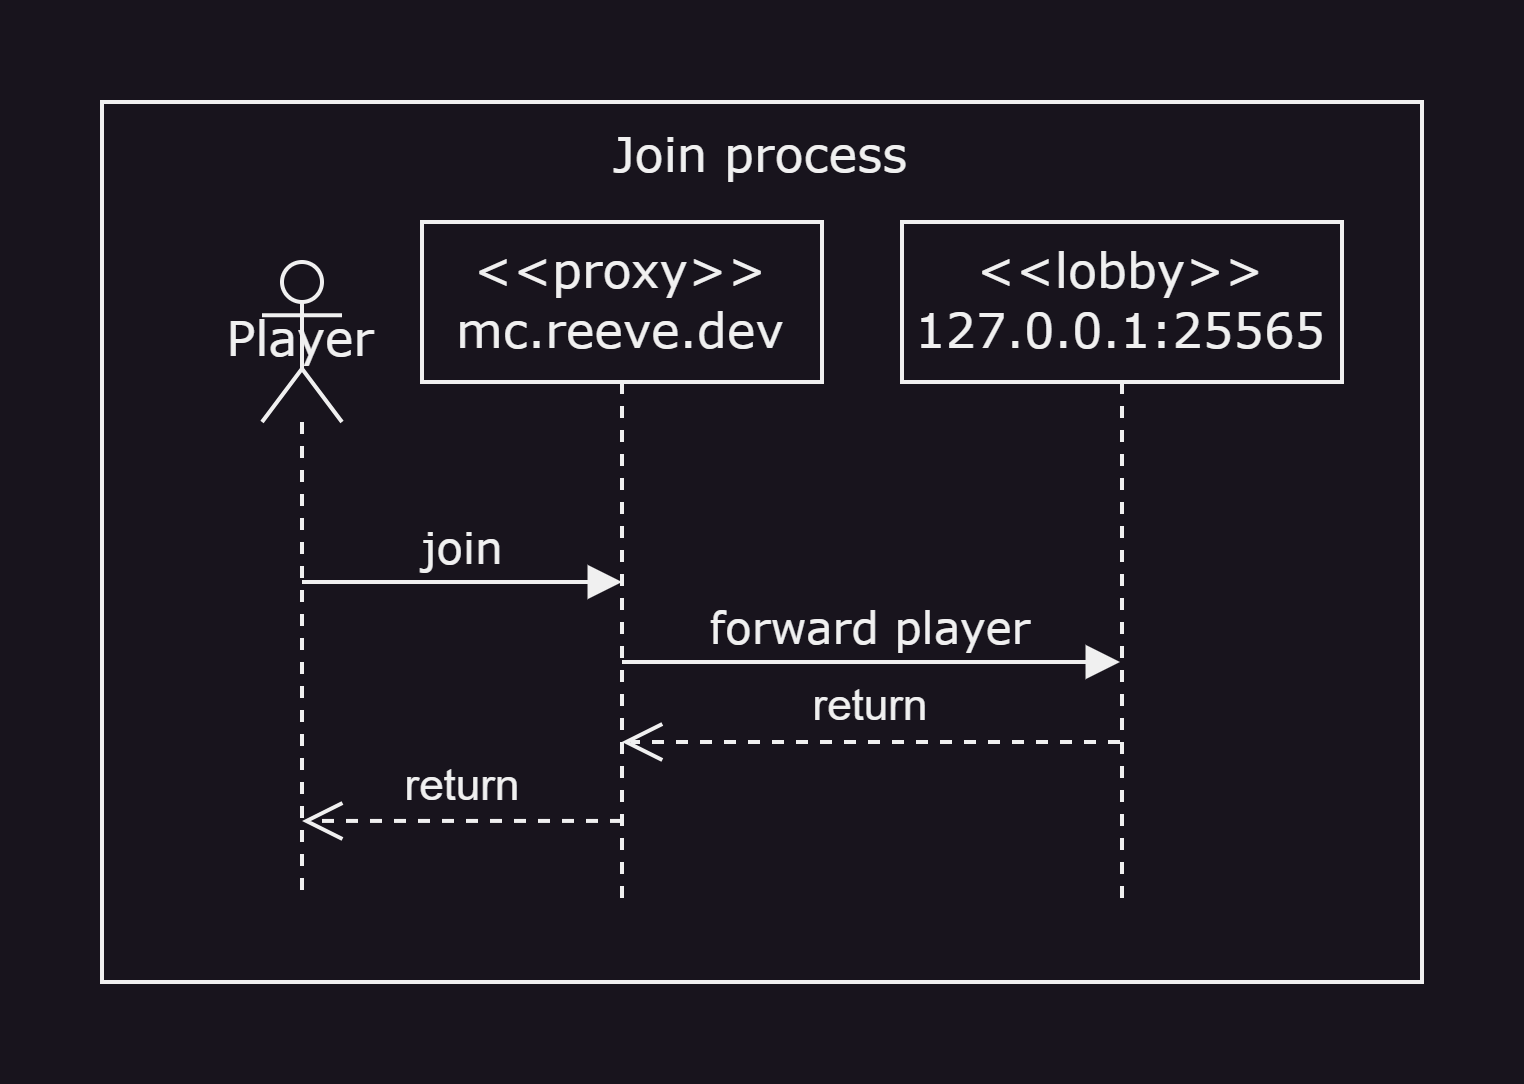 A draw.io diagram of the joining process